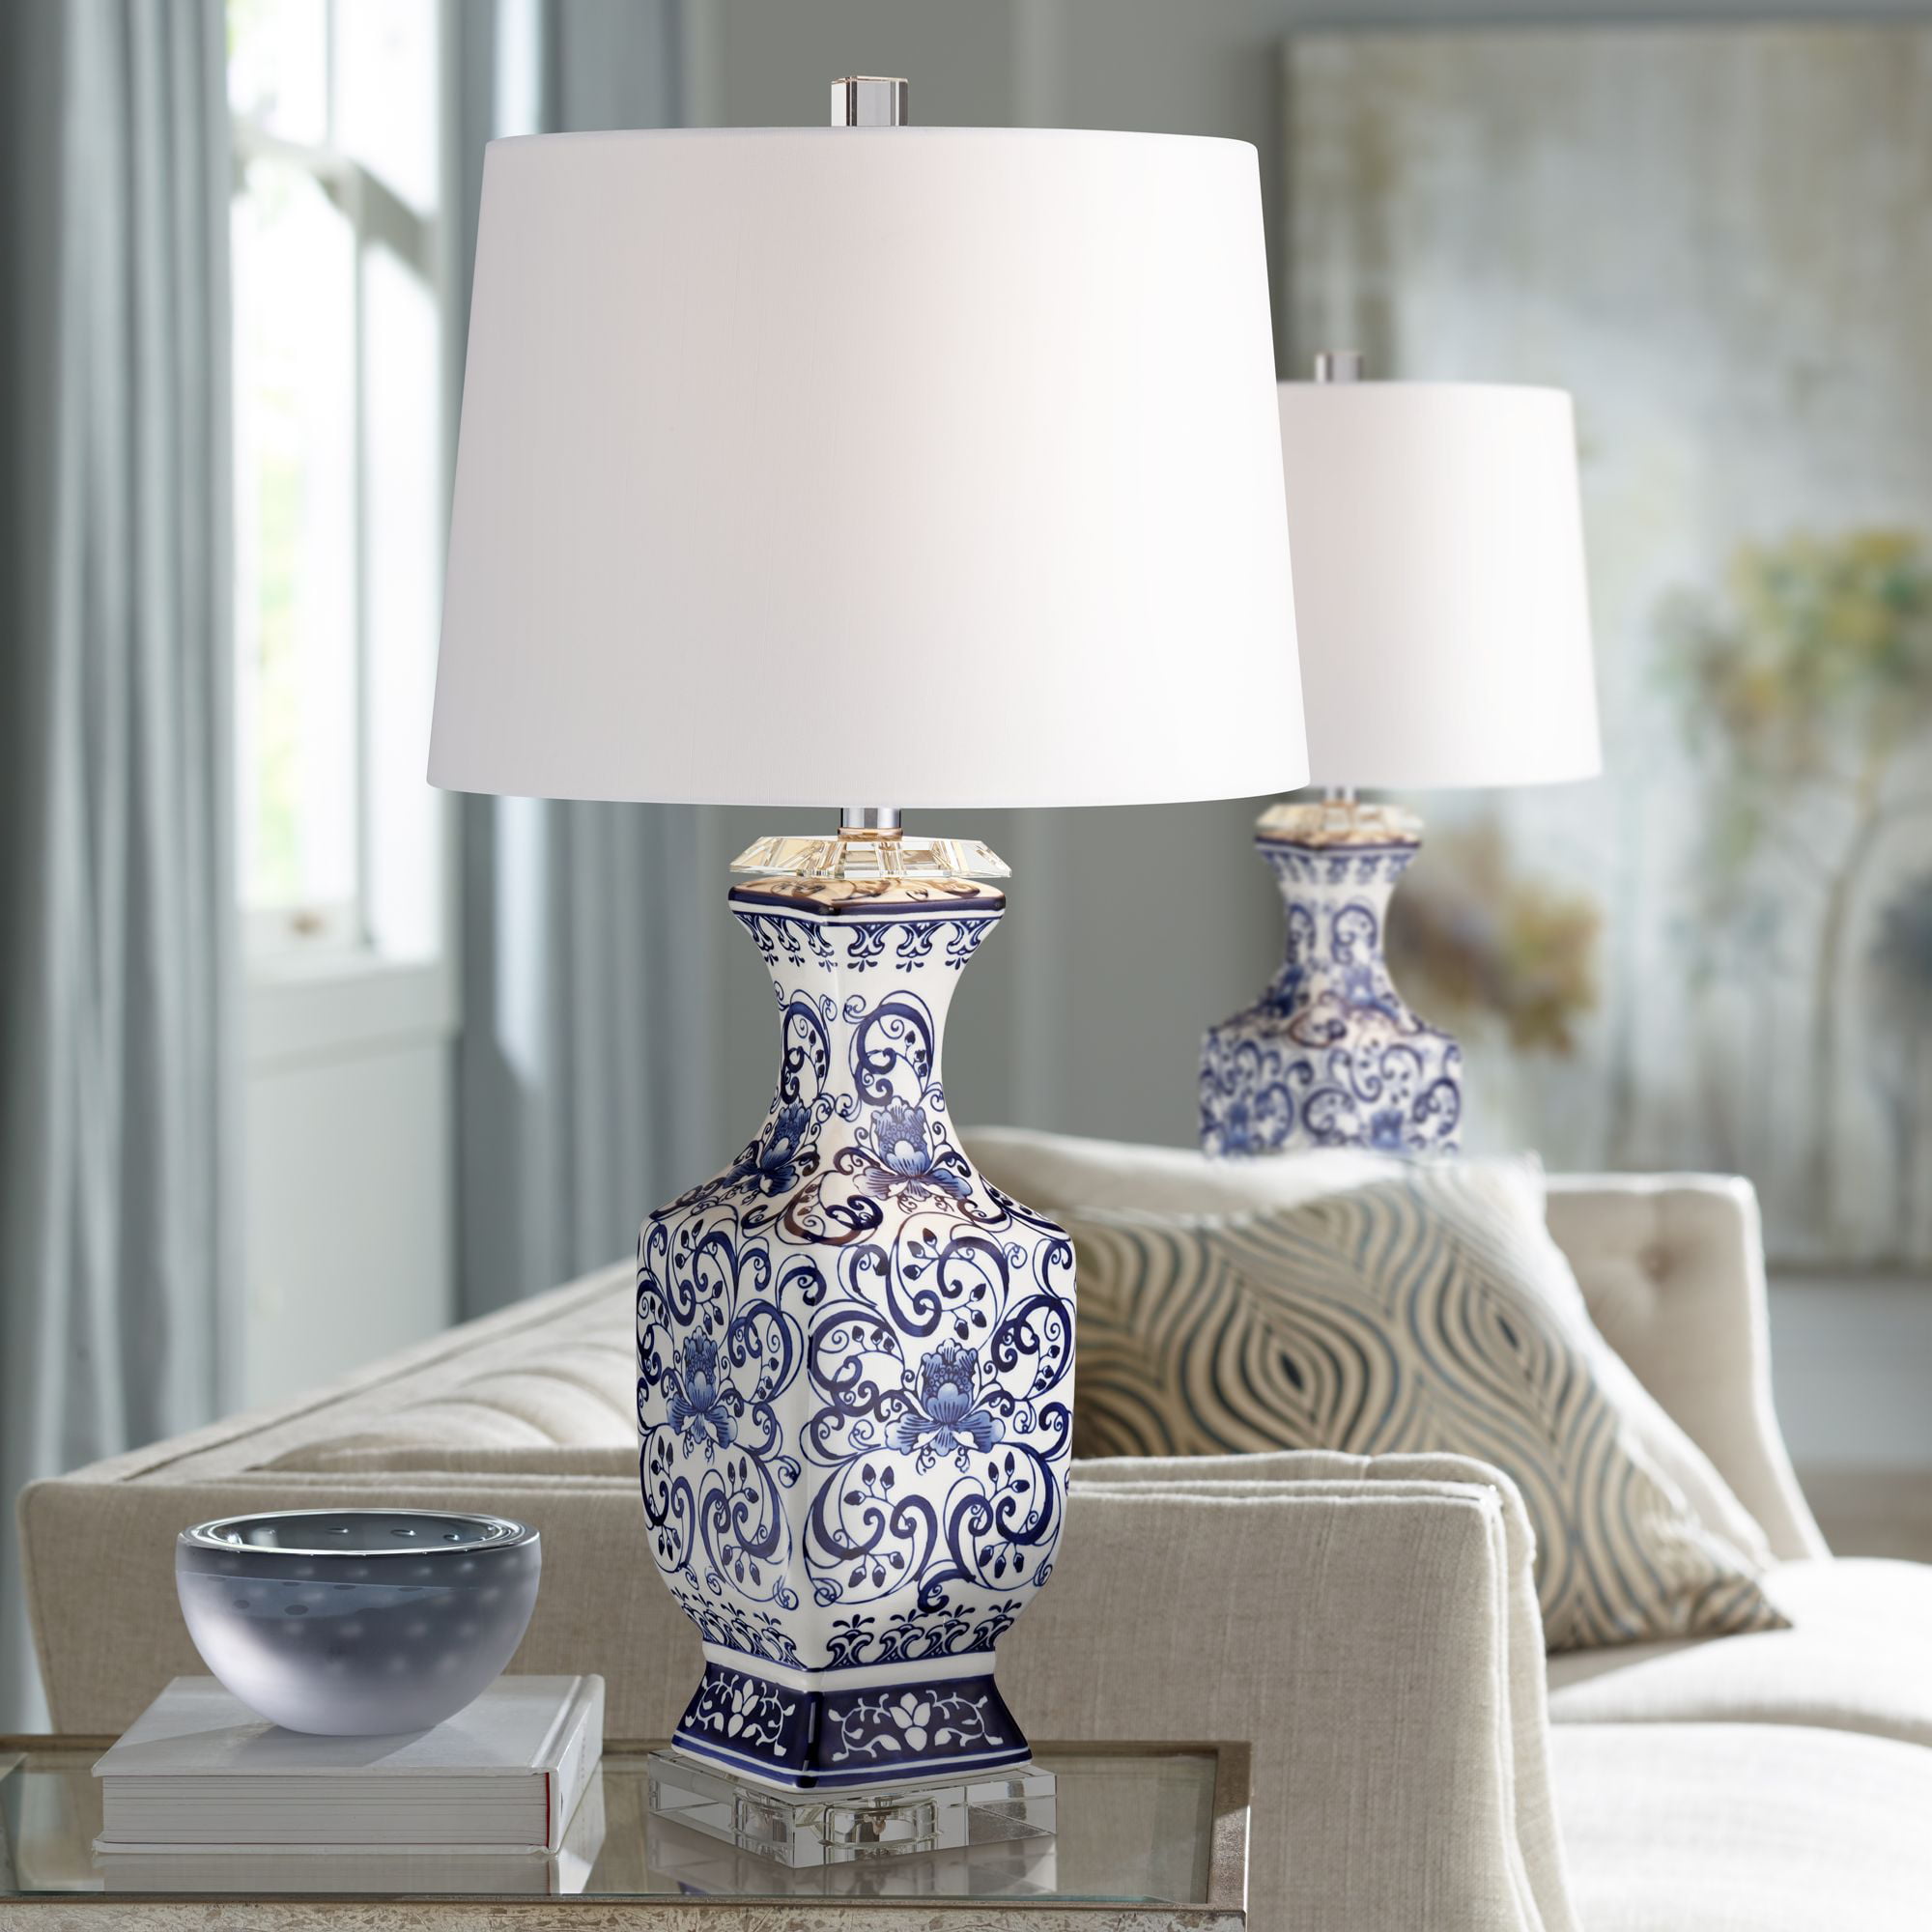 Barnes And Ivy Vintage Style Table Lamp, Vintage Blue And White Table Lamps